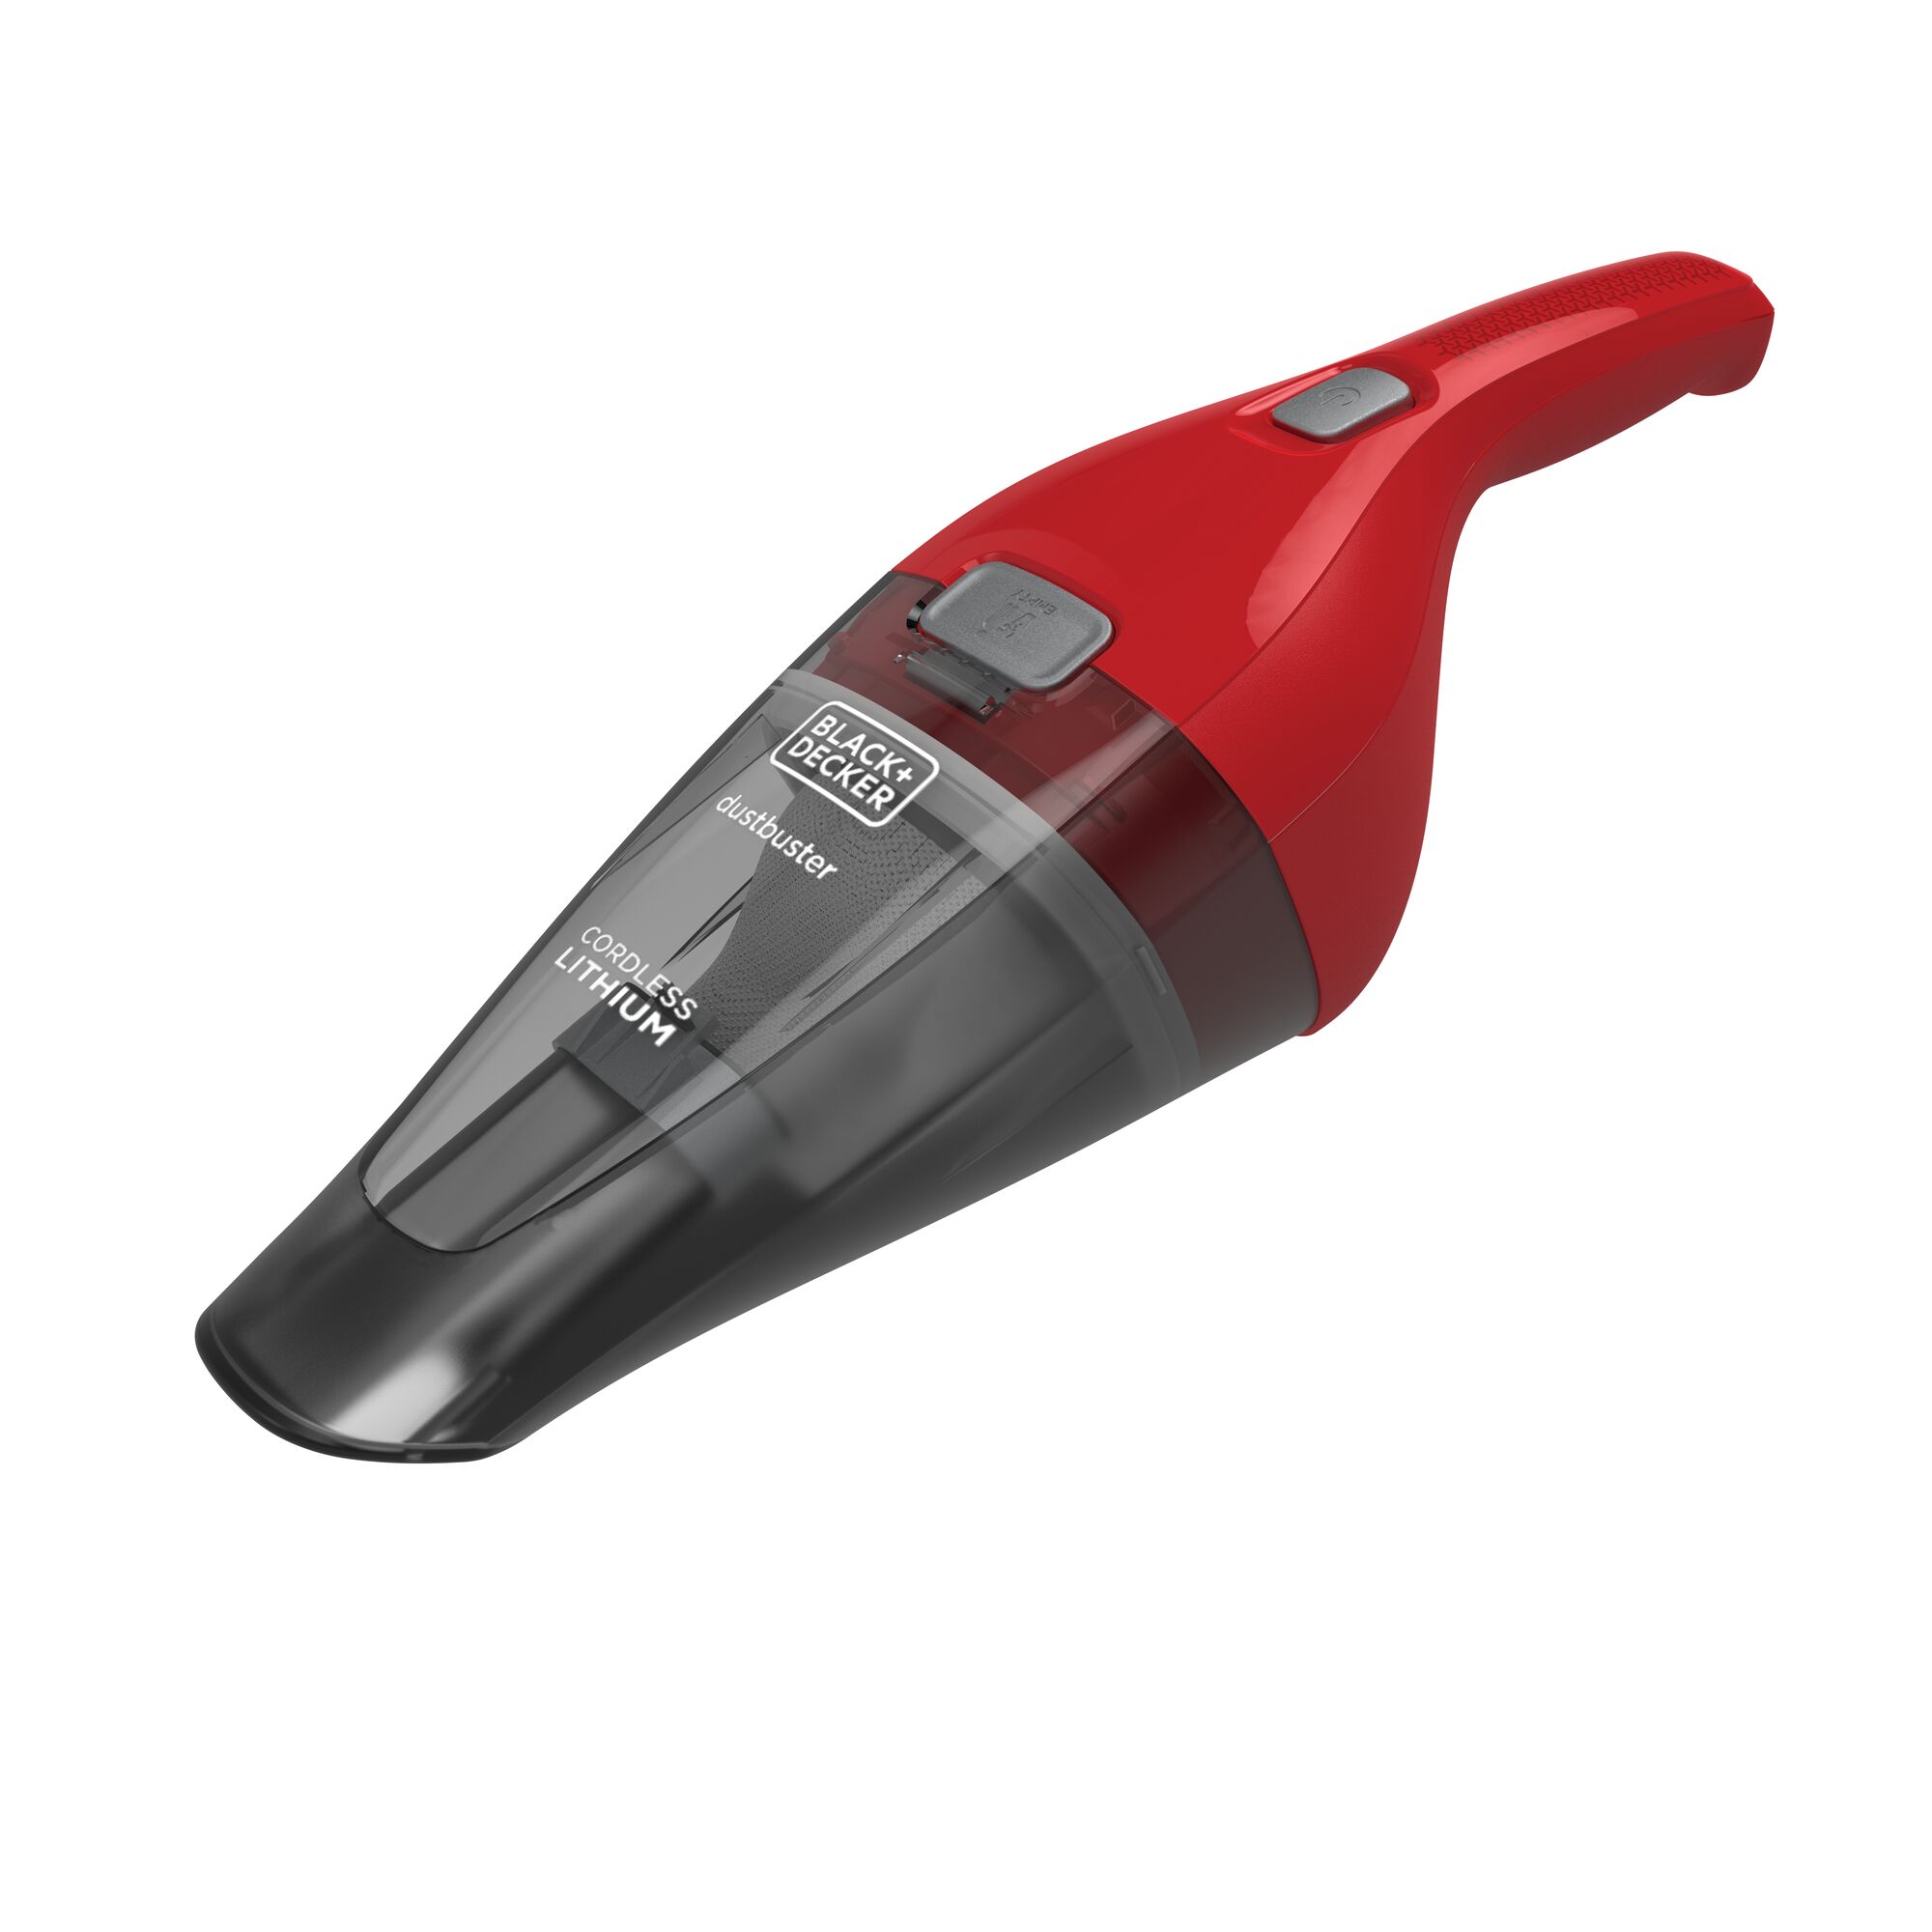 Dust buster Quick Clean Cordless Hand Vacuum.